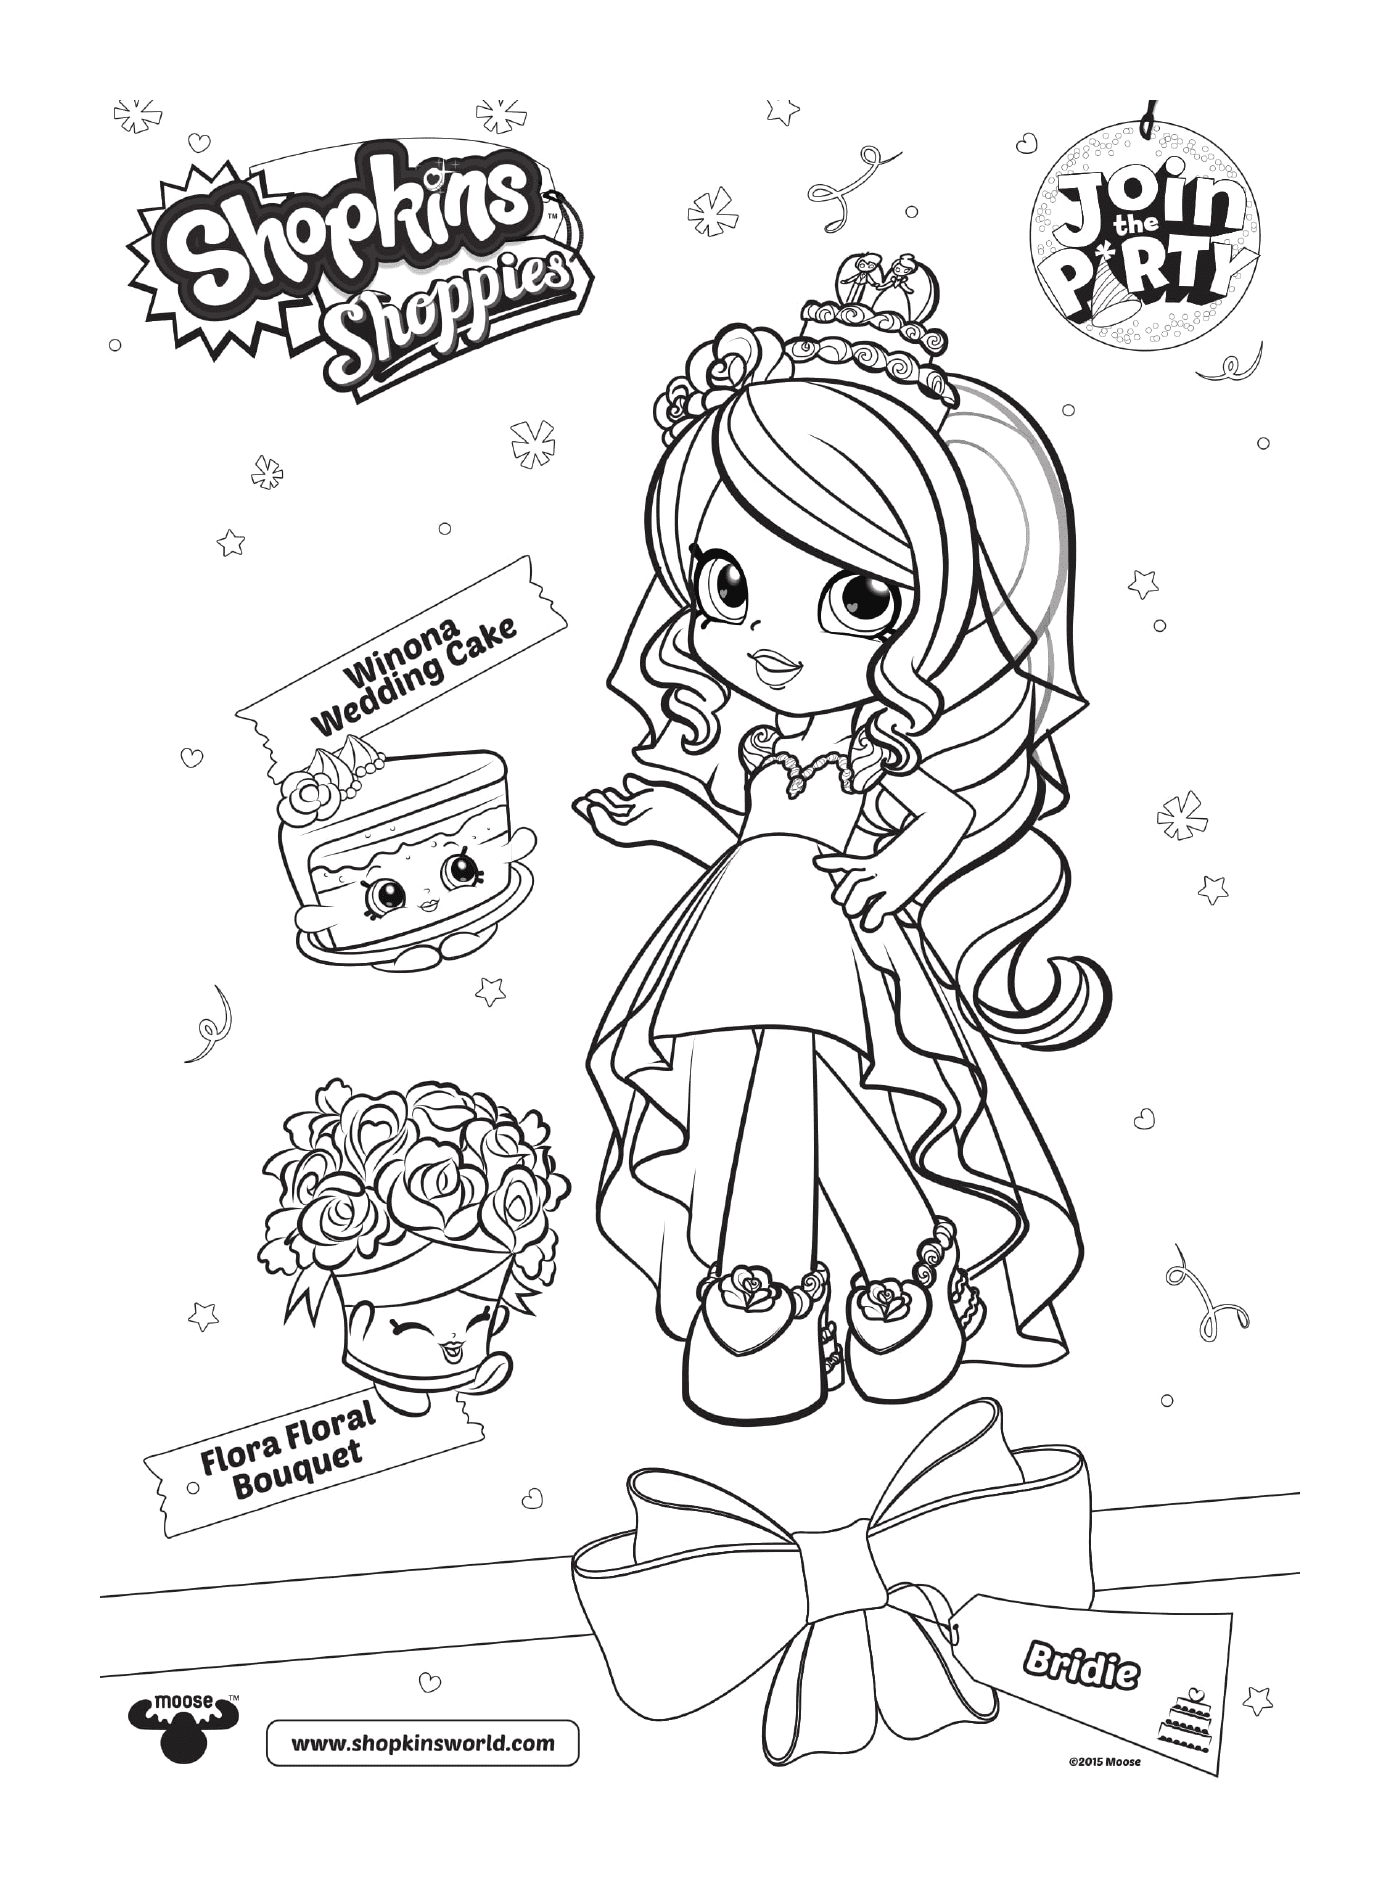 coloriage shopkins shoppies join the party Winona Wedding Cake Flora Floral Bouquet